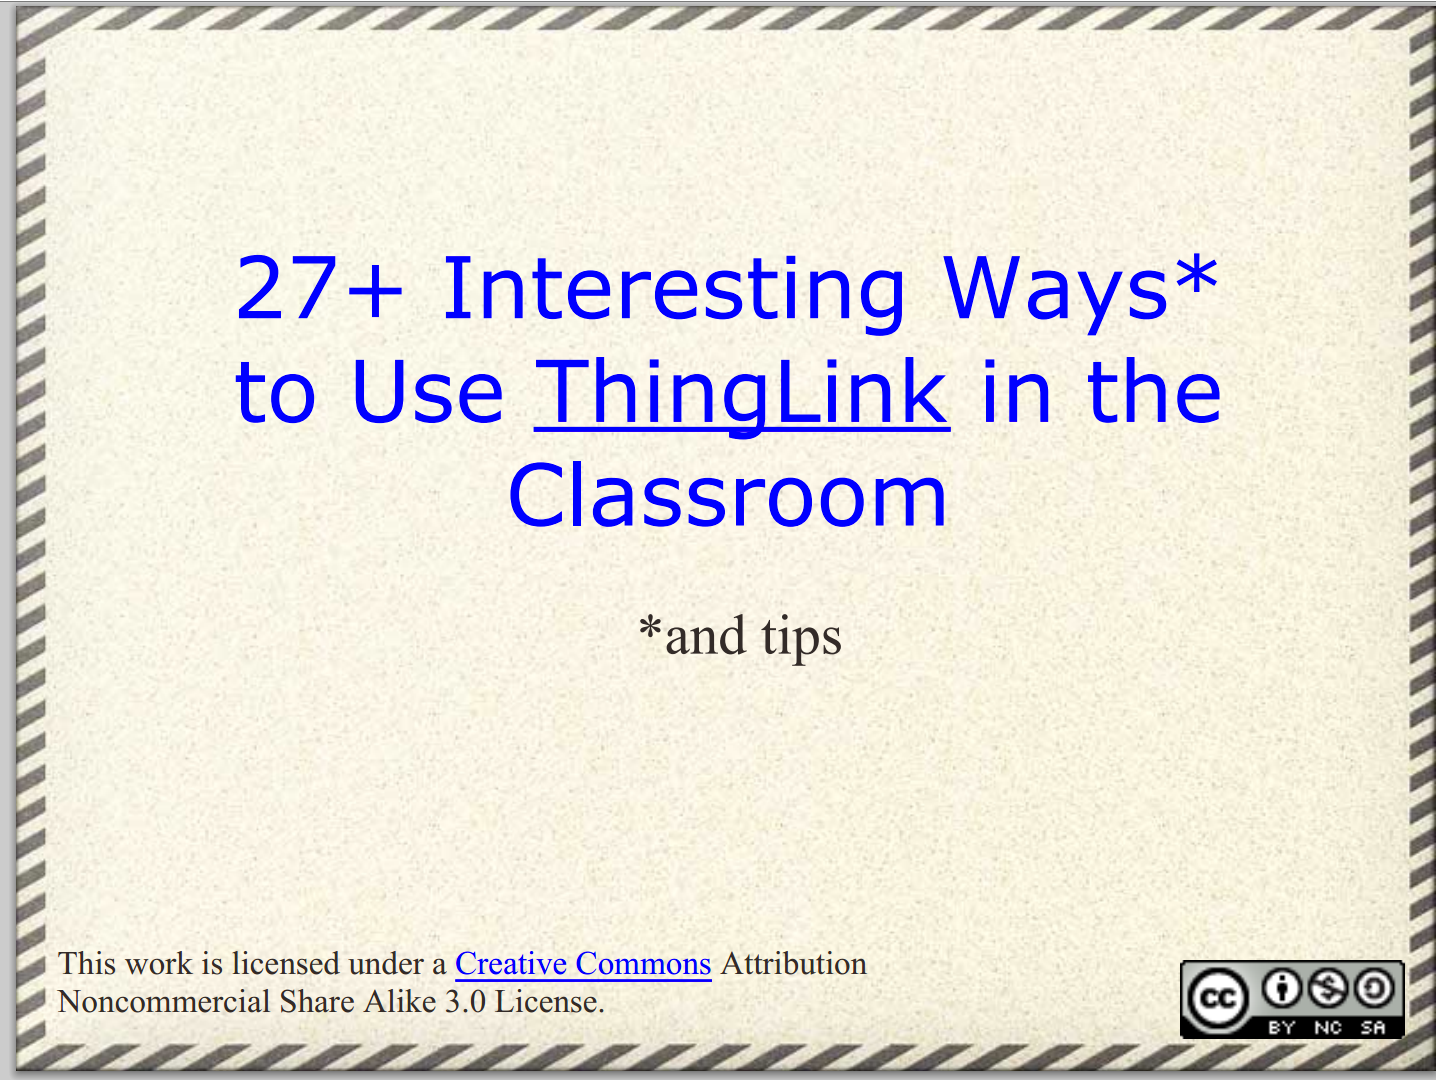 Teachers Guide to Creating Rich Interactive Visuals Using ThingLink